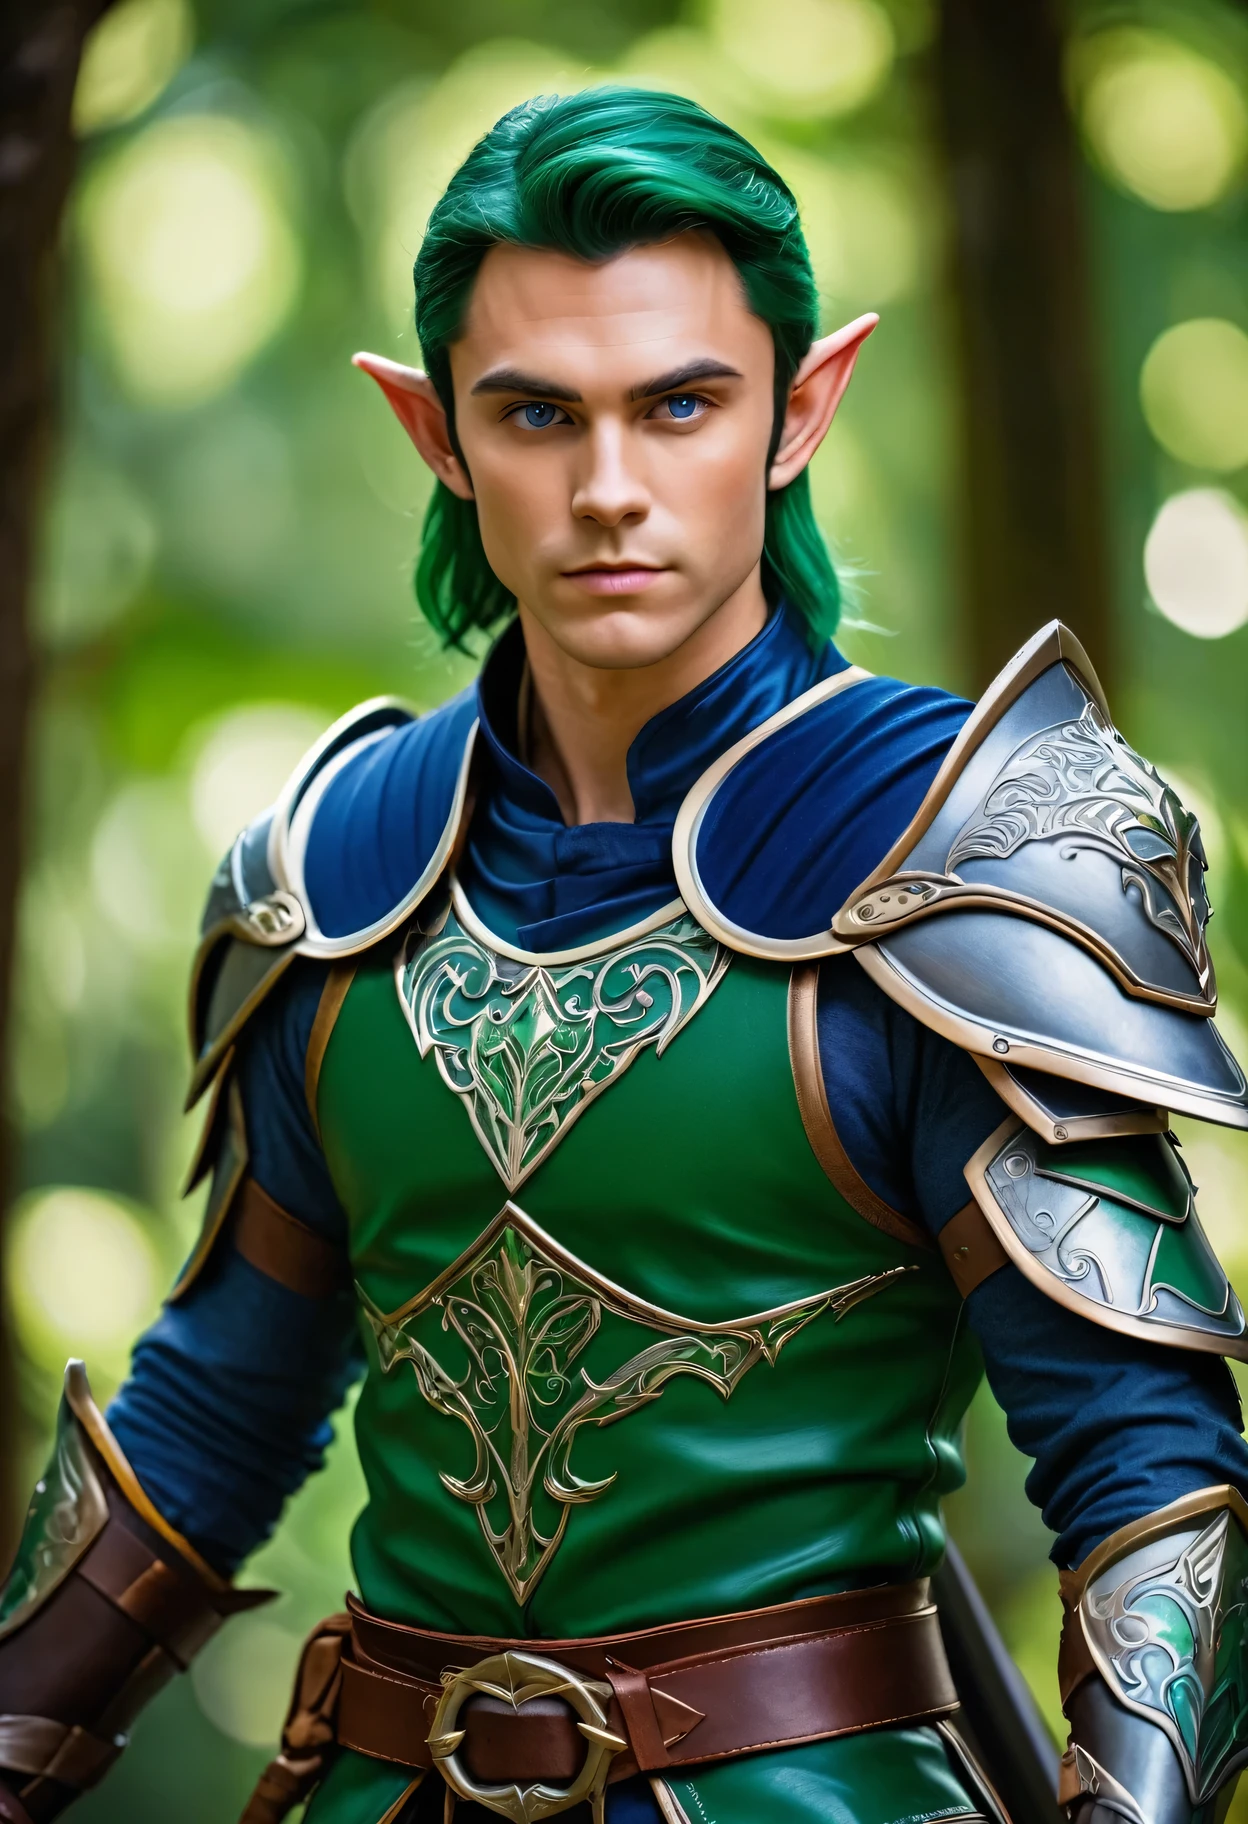 ProFessional photography For an elite magazine, An ElF warrior in gorgeous armor with intricate green painting, An ElF warrior posing, an elF blade made oF blue steel in his hand, an ElF warrior looking at the viewer, Full pose, Full body, swordsman's Fighting stance, 微微眯起眼睛, 佳能 EOS R5 相机搭配佳能 RF 100-500 镜头 mm F4.5-7.1L 是 USM, 500 毫米, 1/500 秒., F/7.1 和 ISO 1000.